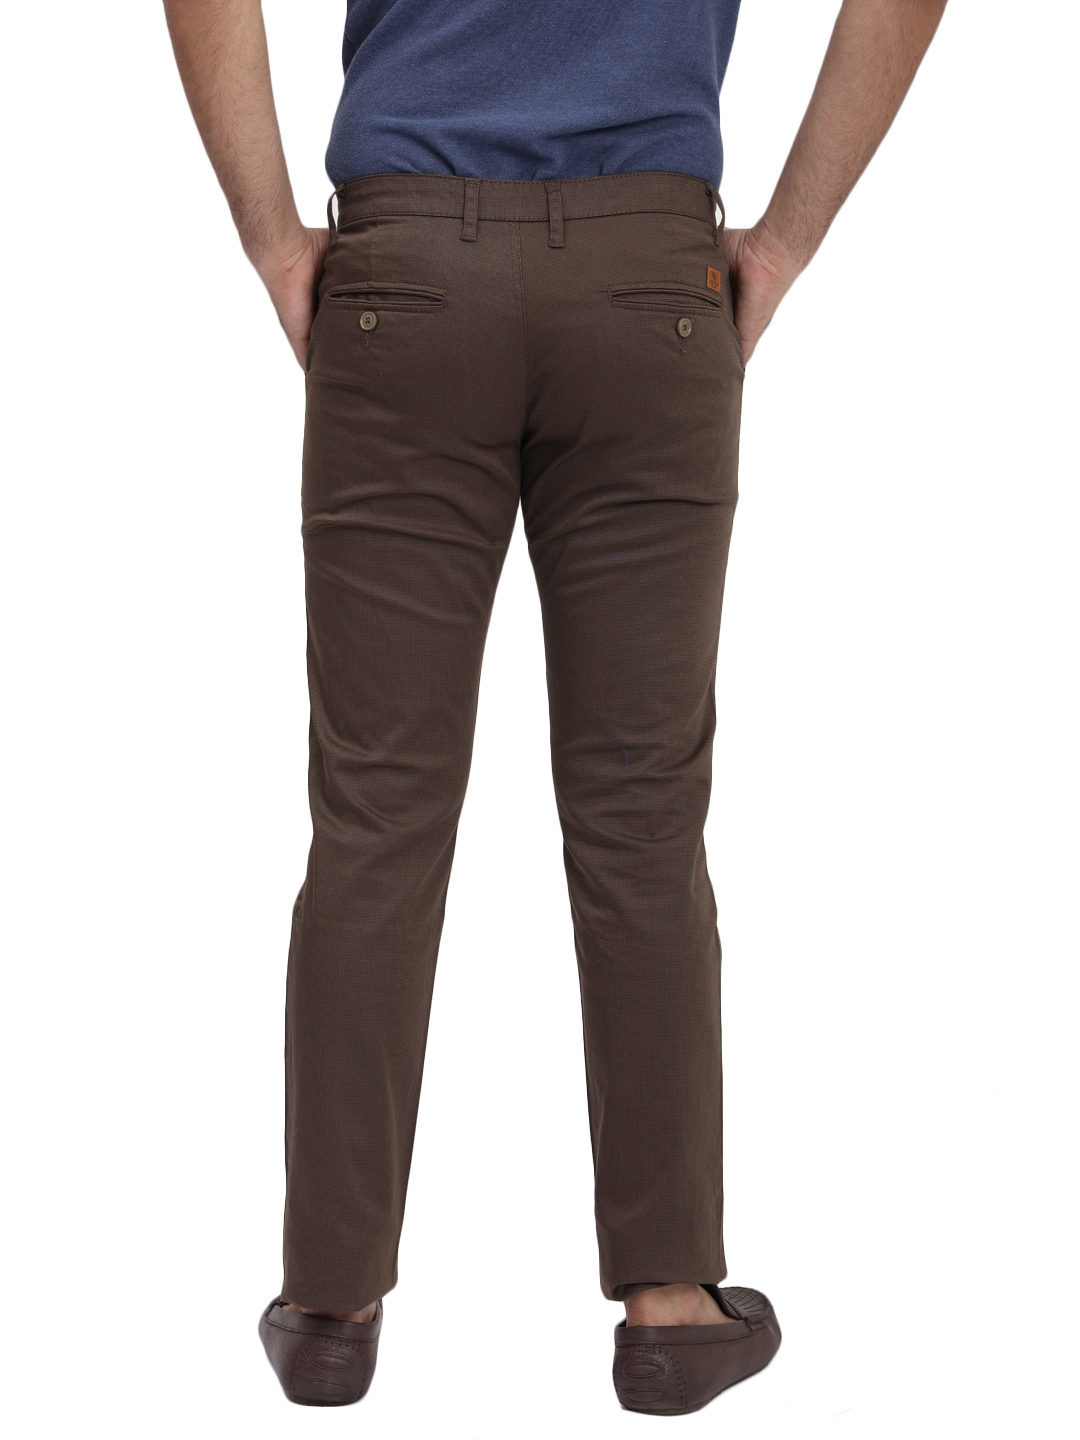 D'cot by Donear | D'cot by Donear Men's Brown Cotton Trousers 3